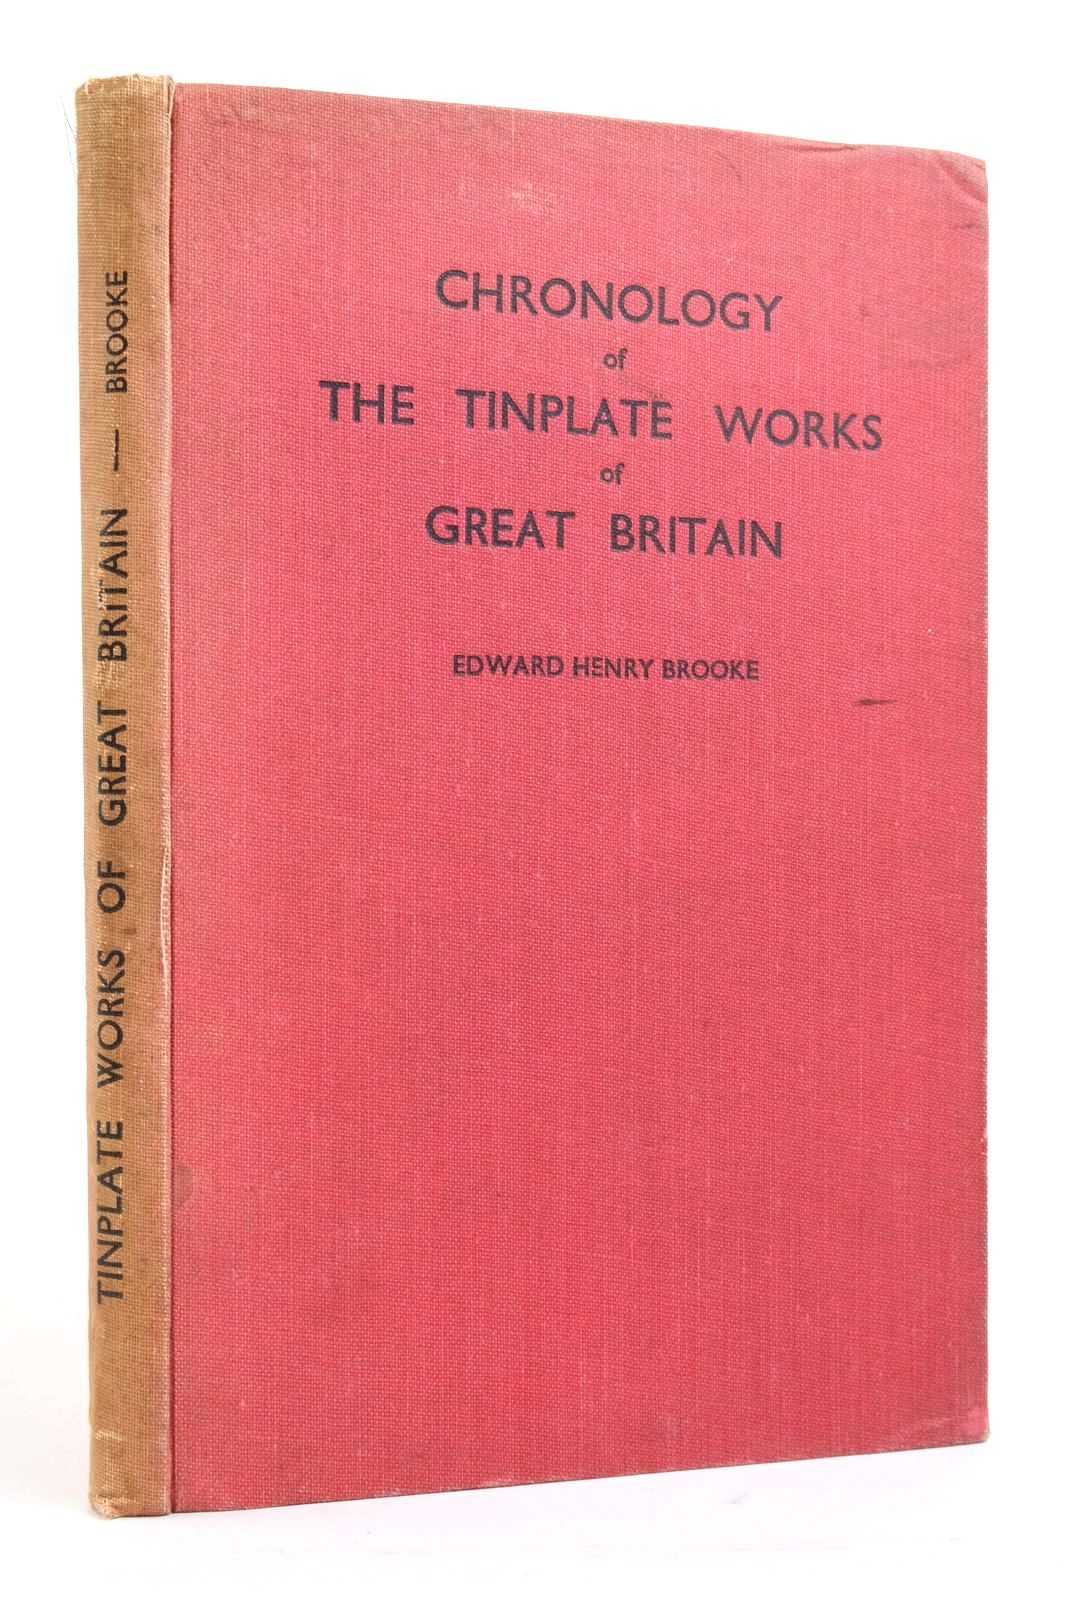 Photo of CHRONOLOGY OF THE TINPLATE WORKS OF GREAT BRITAIN written by Brooke, Edward Henry published by William Lewis (Printers) Ltd (STOCK CODE: 2136097)  for sale by Stella & Rose's Books